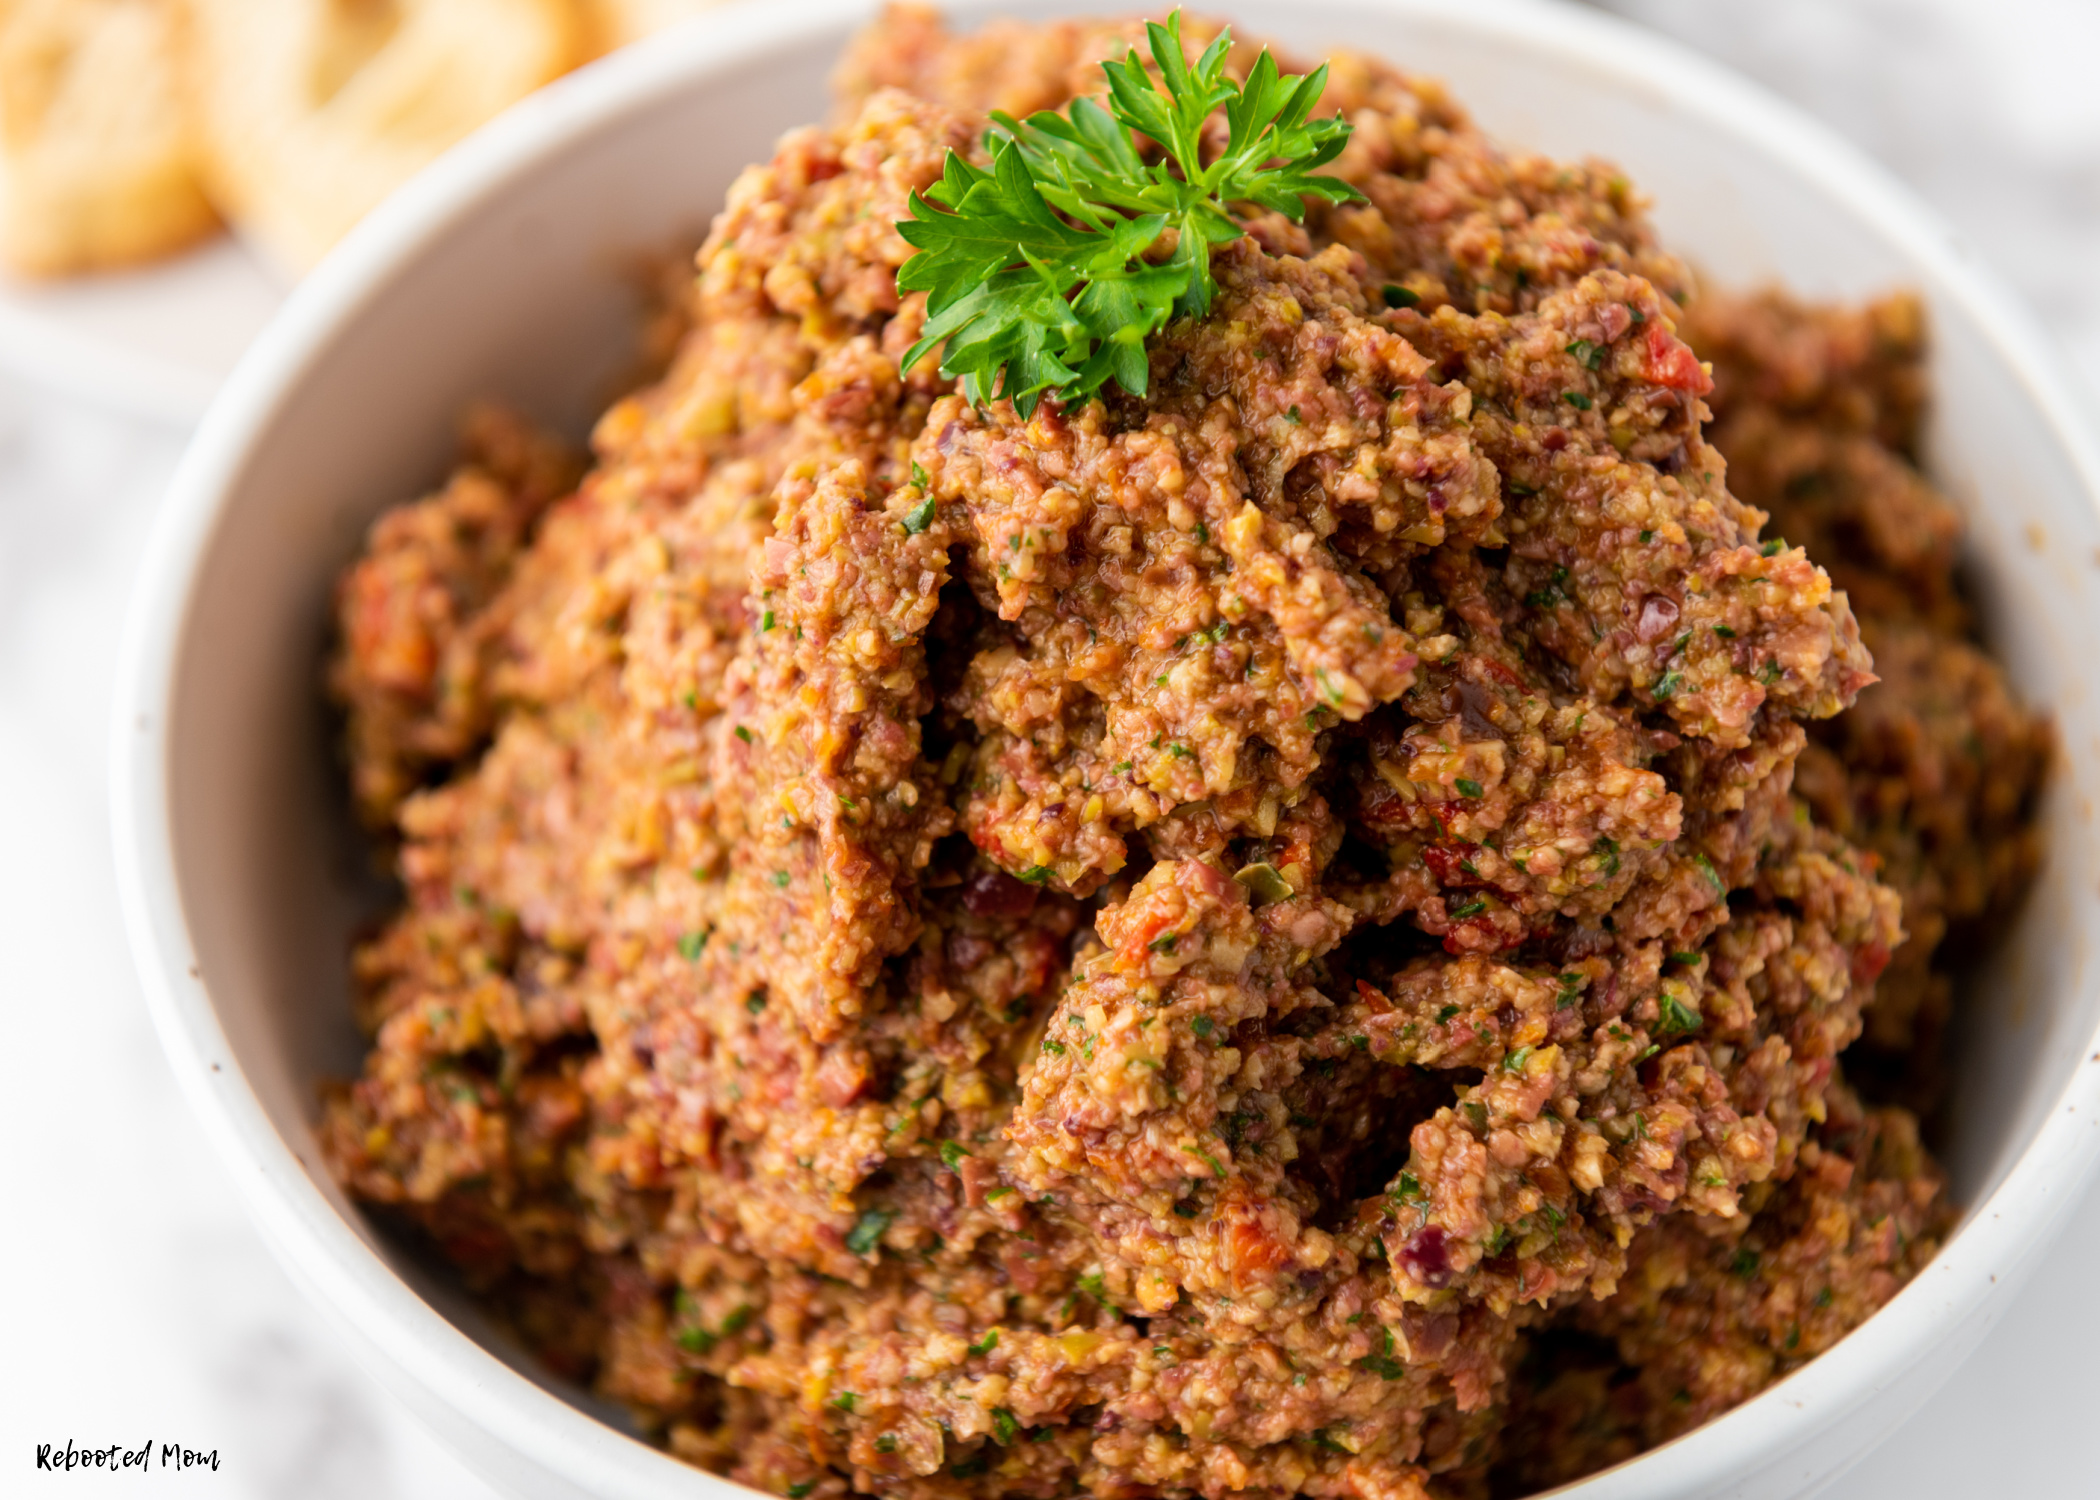 Homemade Olive Tapenade is a wonderful olive spread that is easy to make at home. Learn how to make this bold, zippy, delicious spread easily at home!